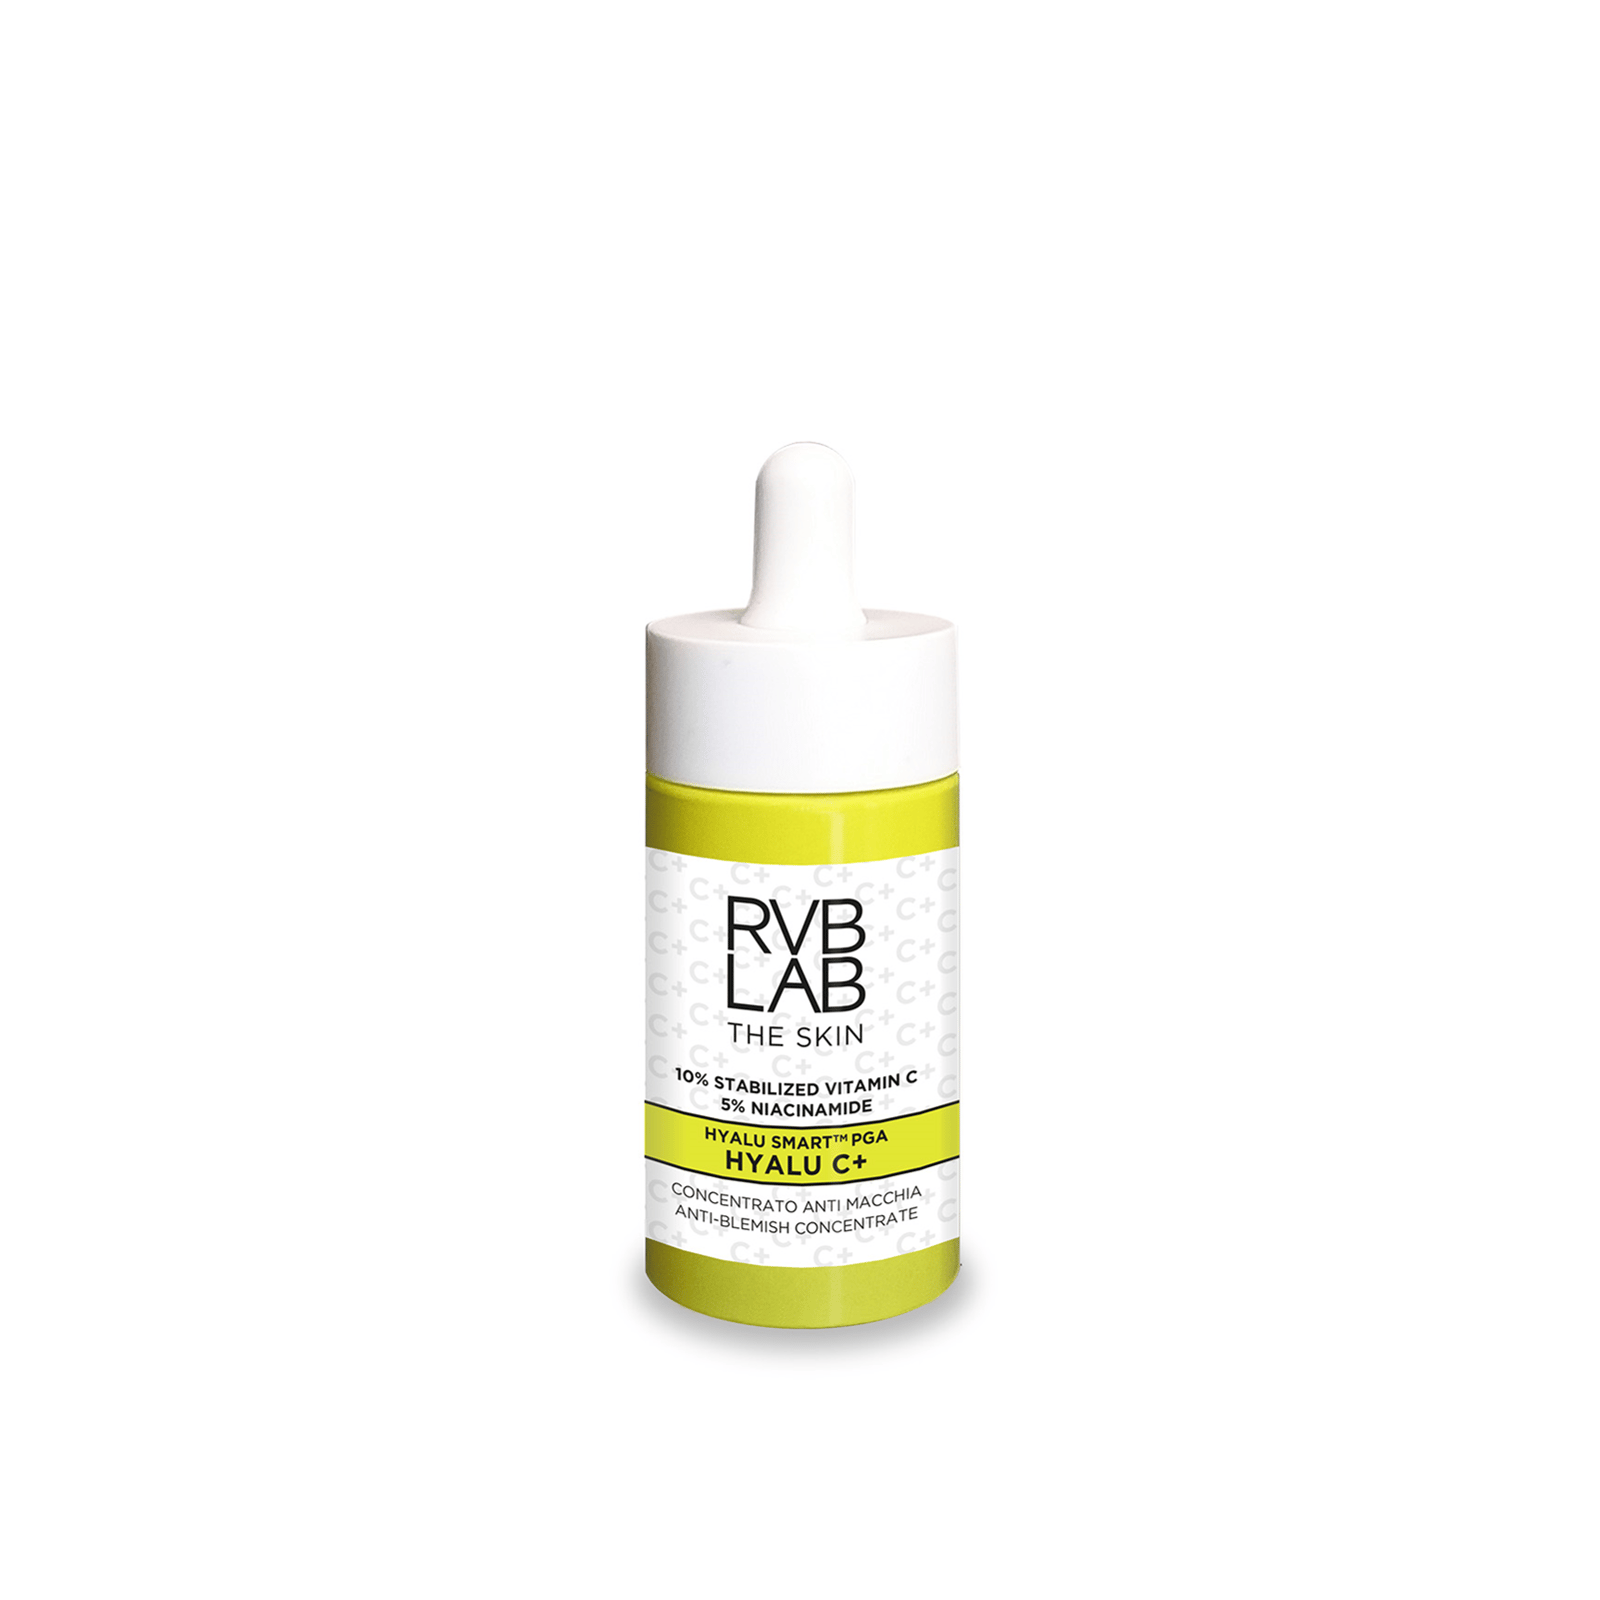 RVB LAB Hyalu C+ Hyperactive Anti-Spot Concentrate 30ml